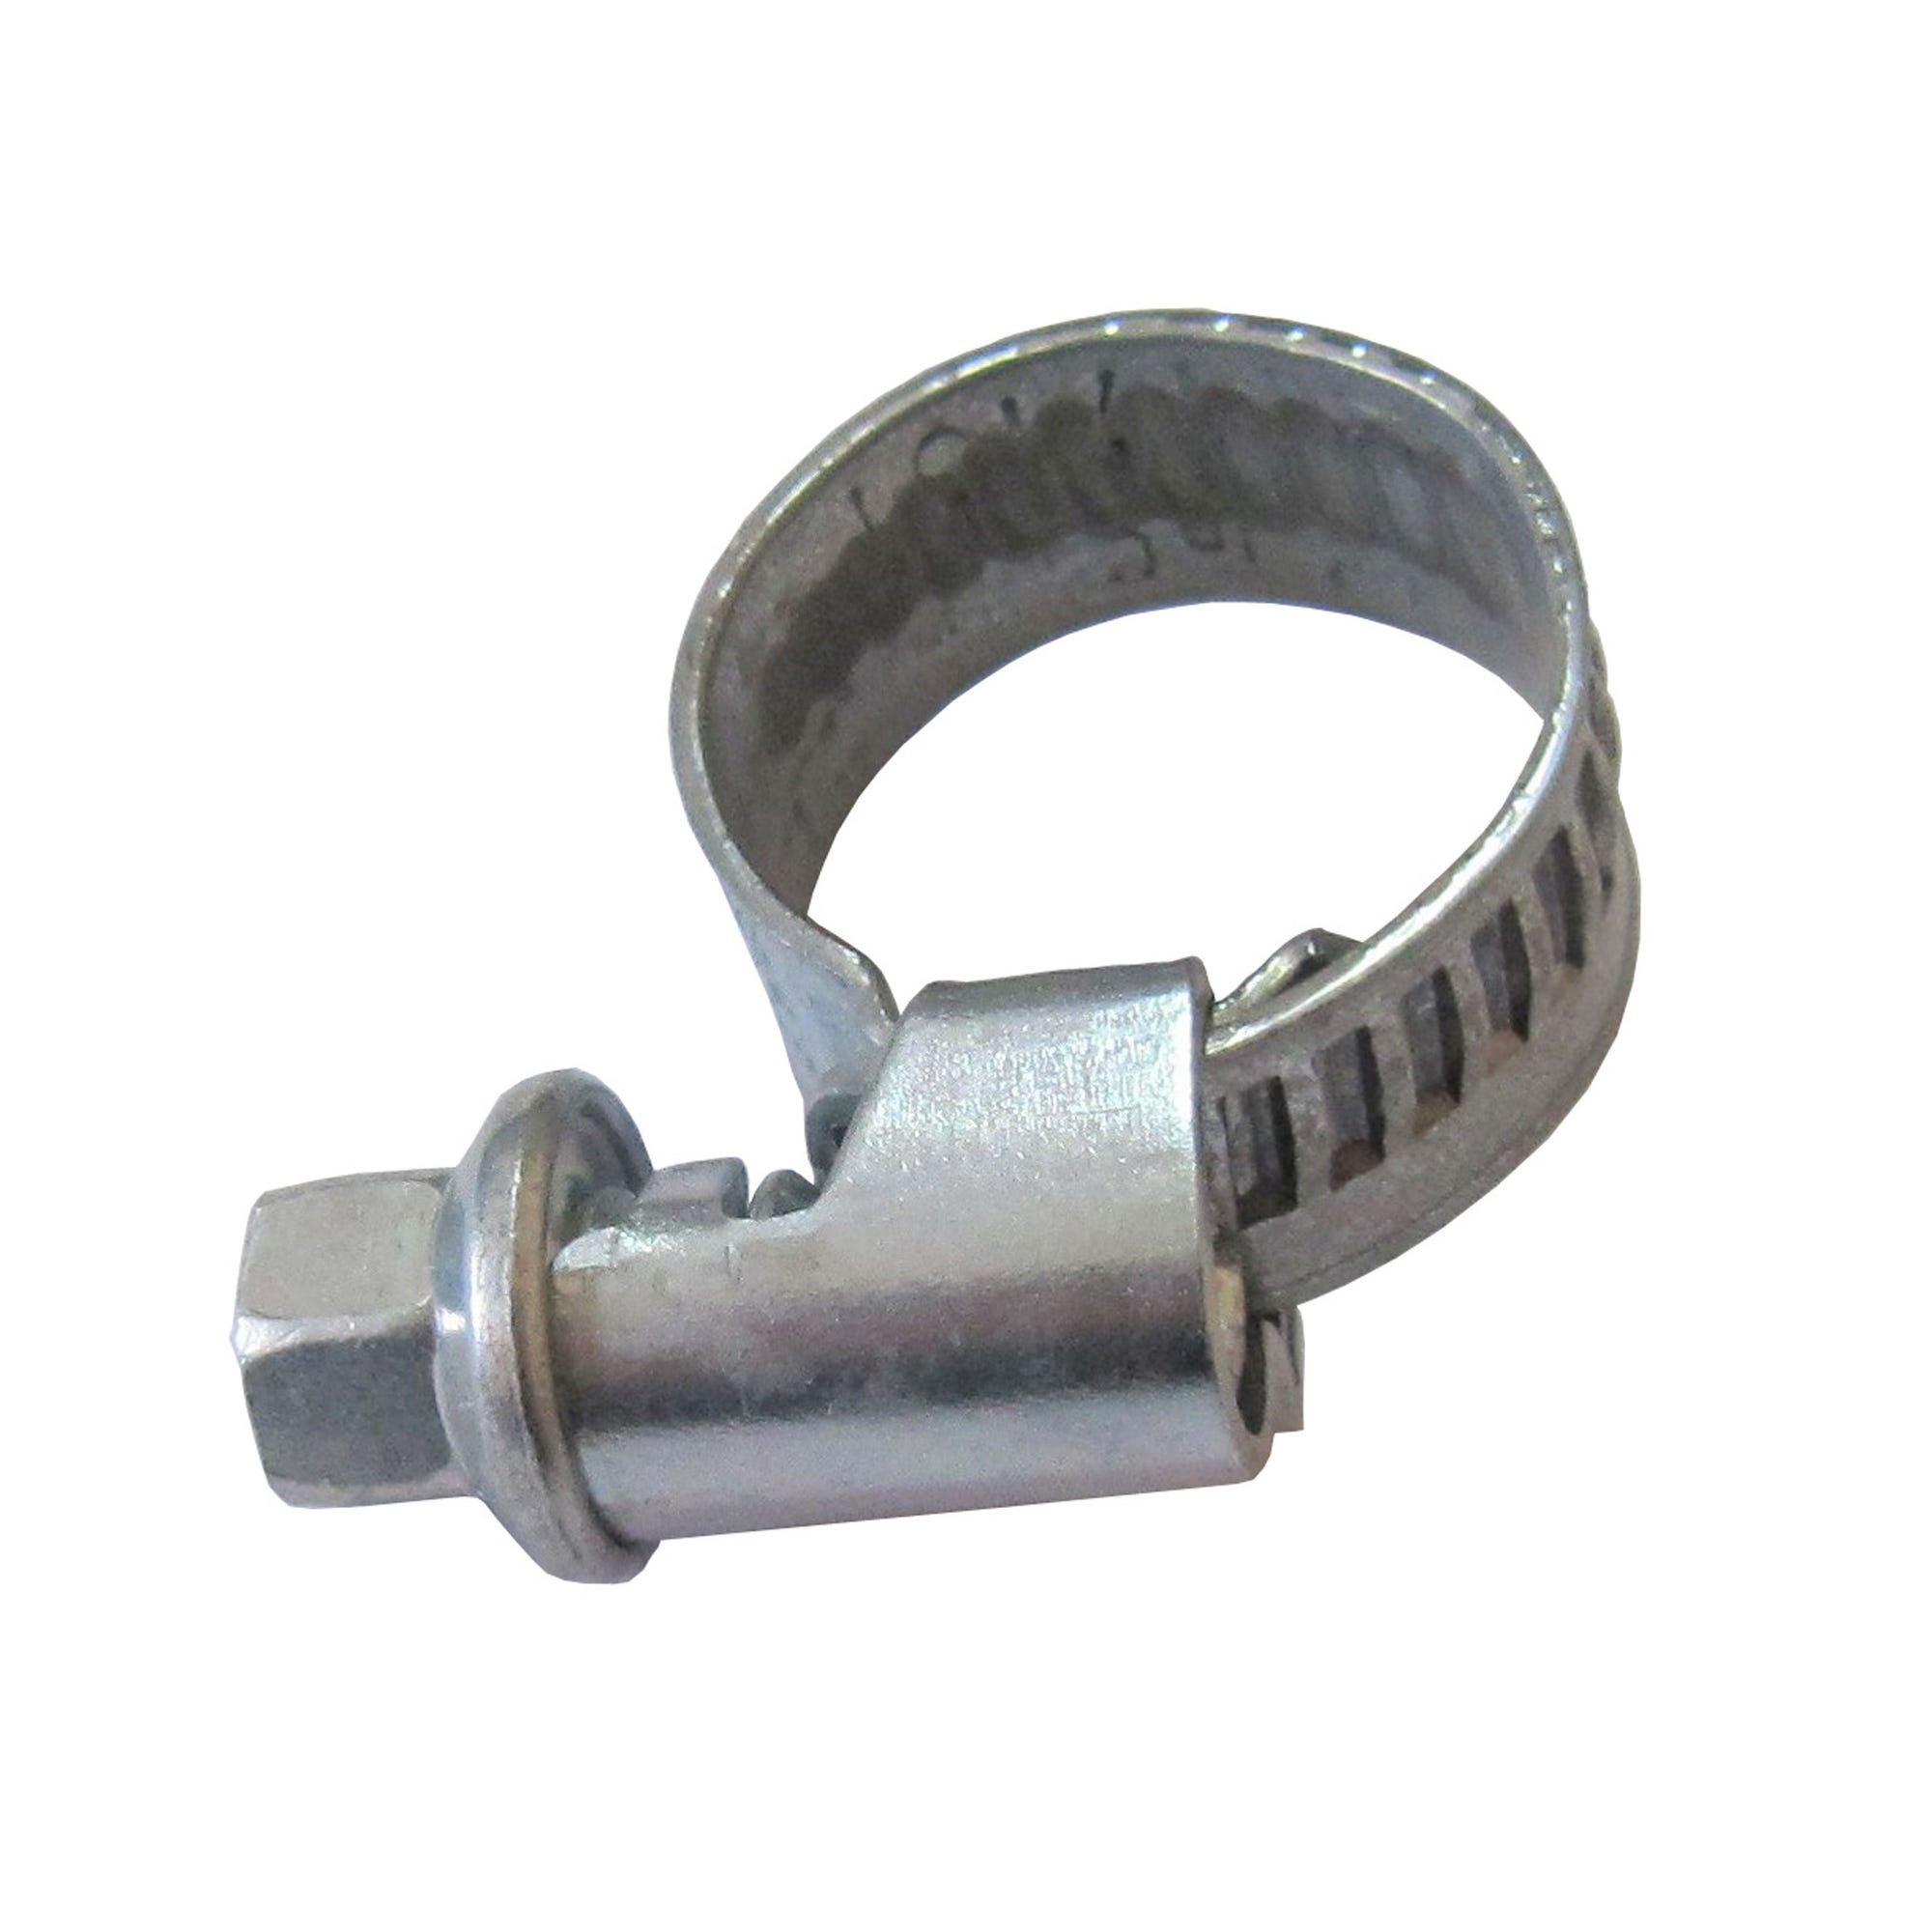 10 colliers inox d.12 a 22mm lg 9 mm 0